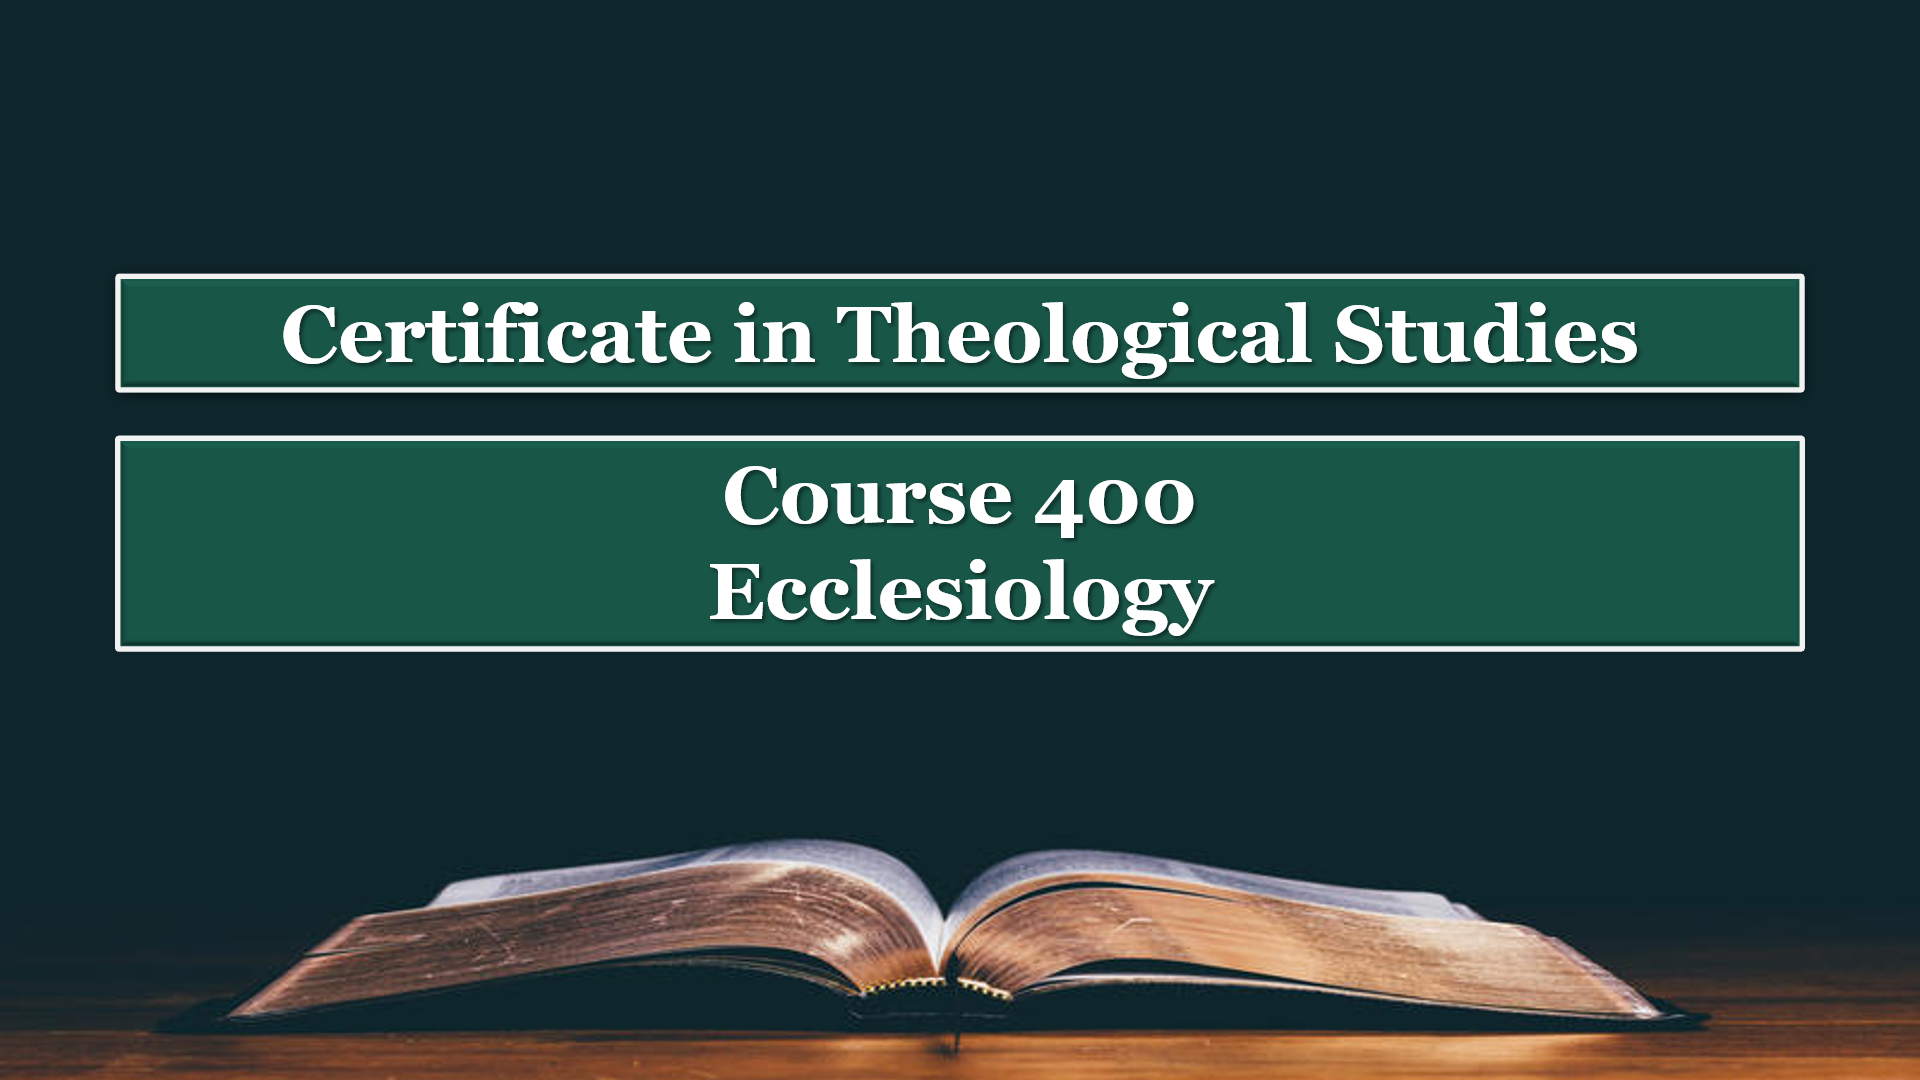 Course 400: Ecclesiology